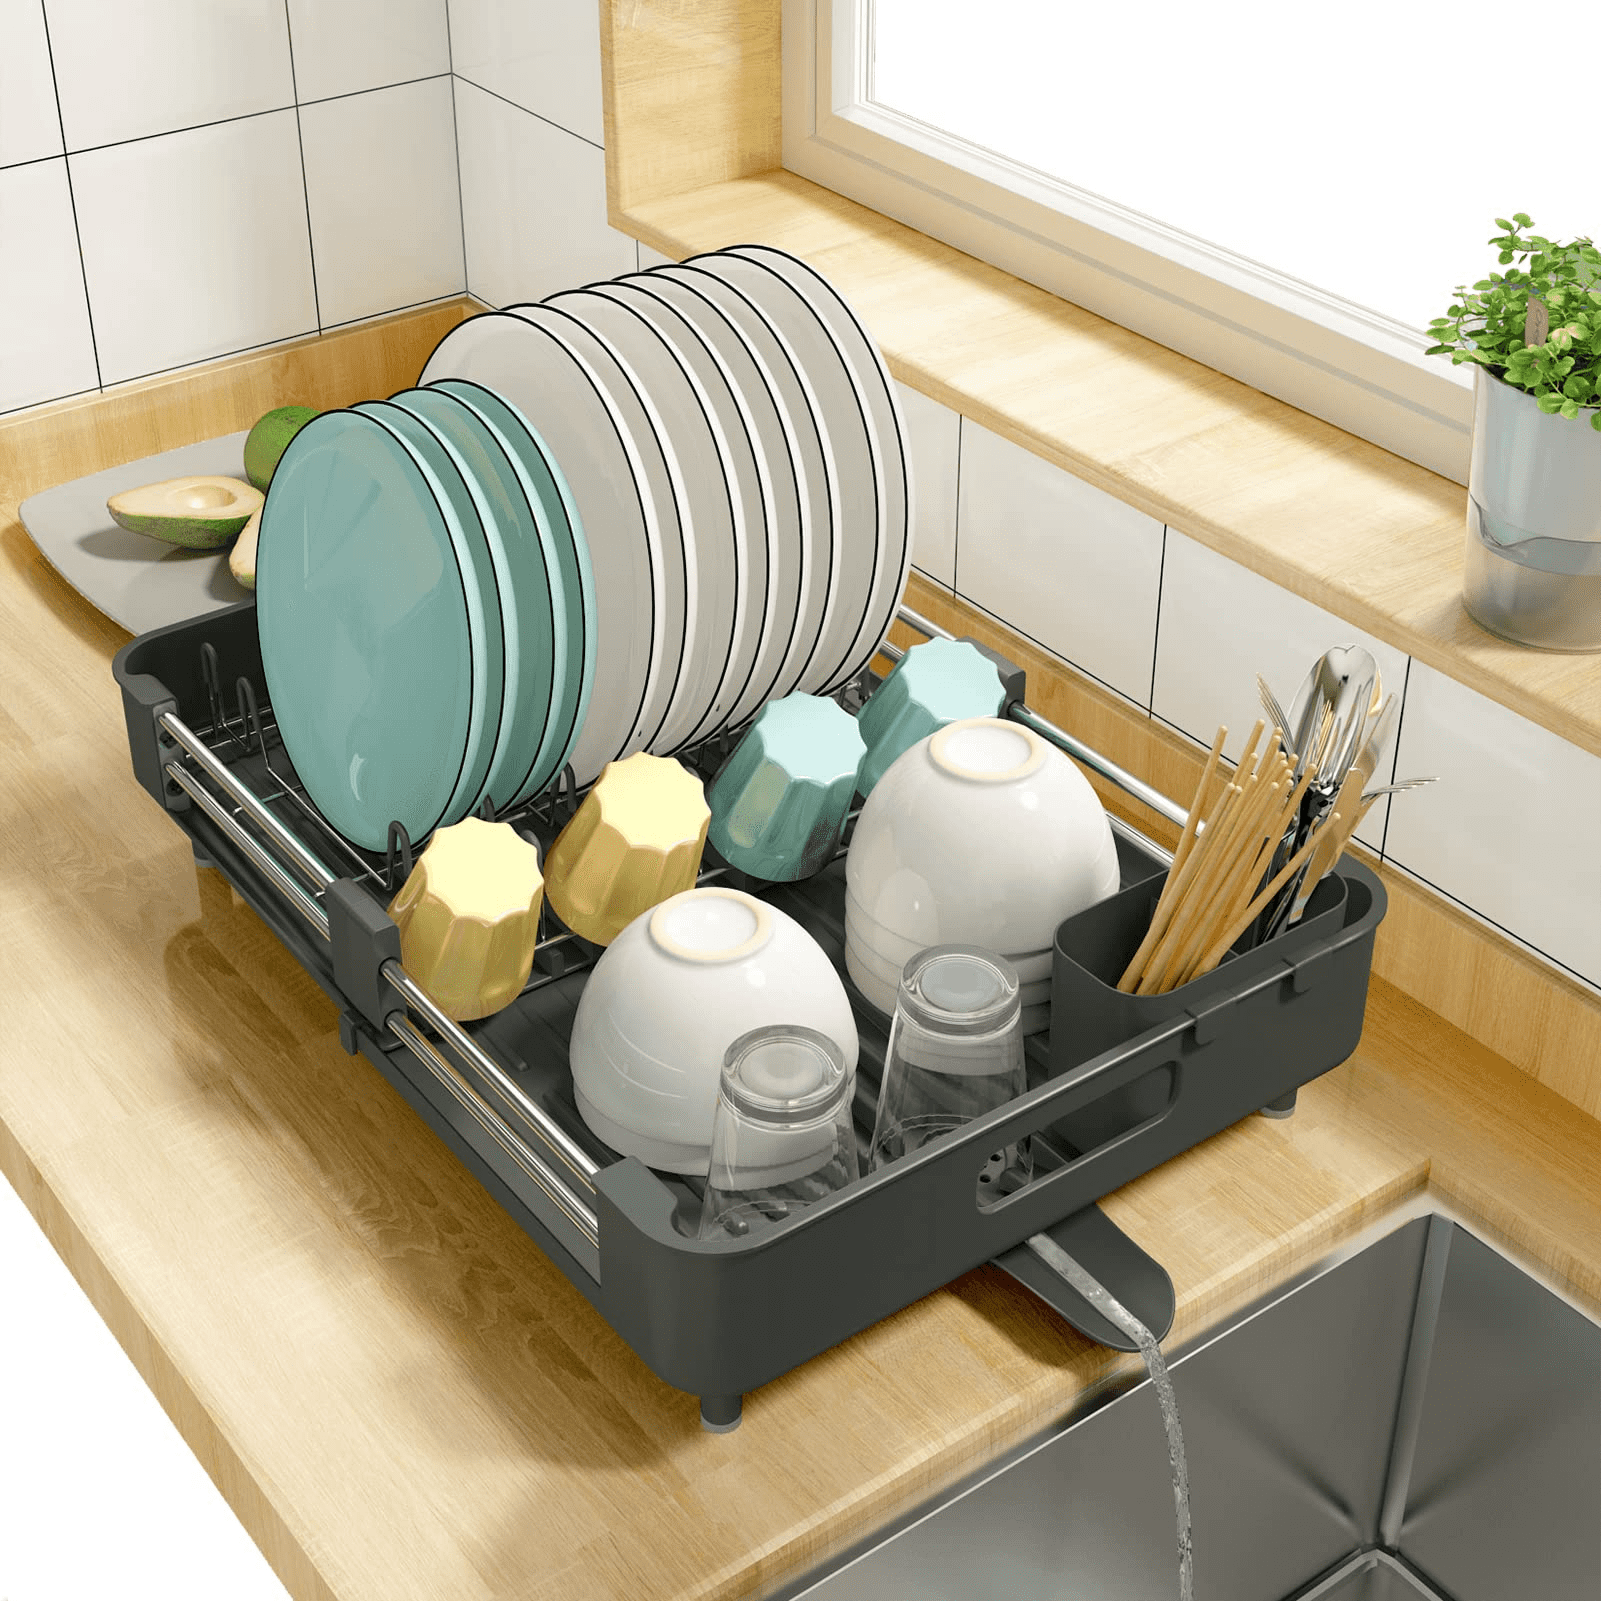 Dish Drying Rack, Rustproof Aluminium Dish Racks for Kitchen Counter,  Expandable(14.9-22.2) Kitchen Sink Large Dish Drying Rack with  Drainboard, Utensil Holder with Drain Spout (Dark Grey) 